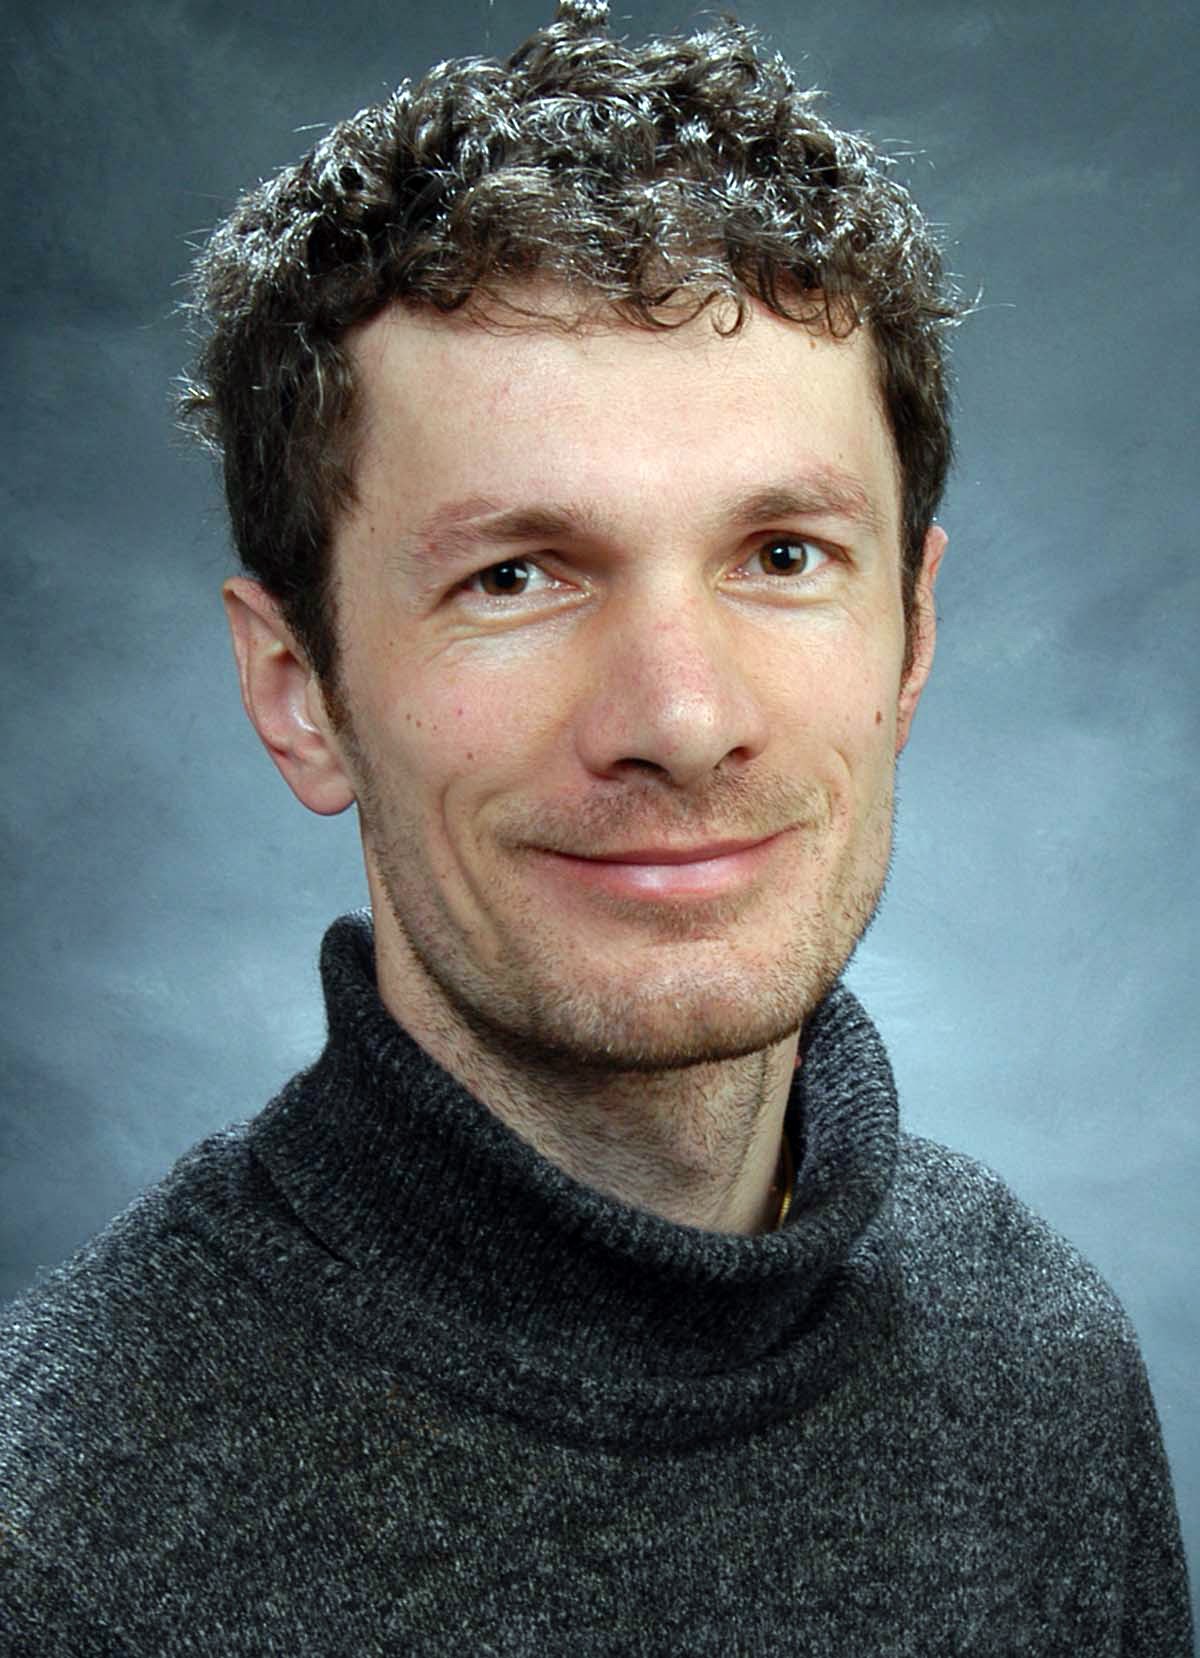 Tibor Beke is the Chair, Associate Professor, Department of Mathematical Sciences at UMass Lowell.